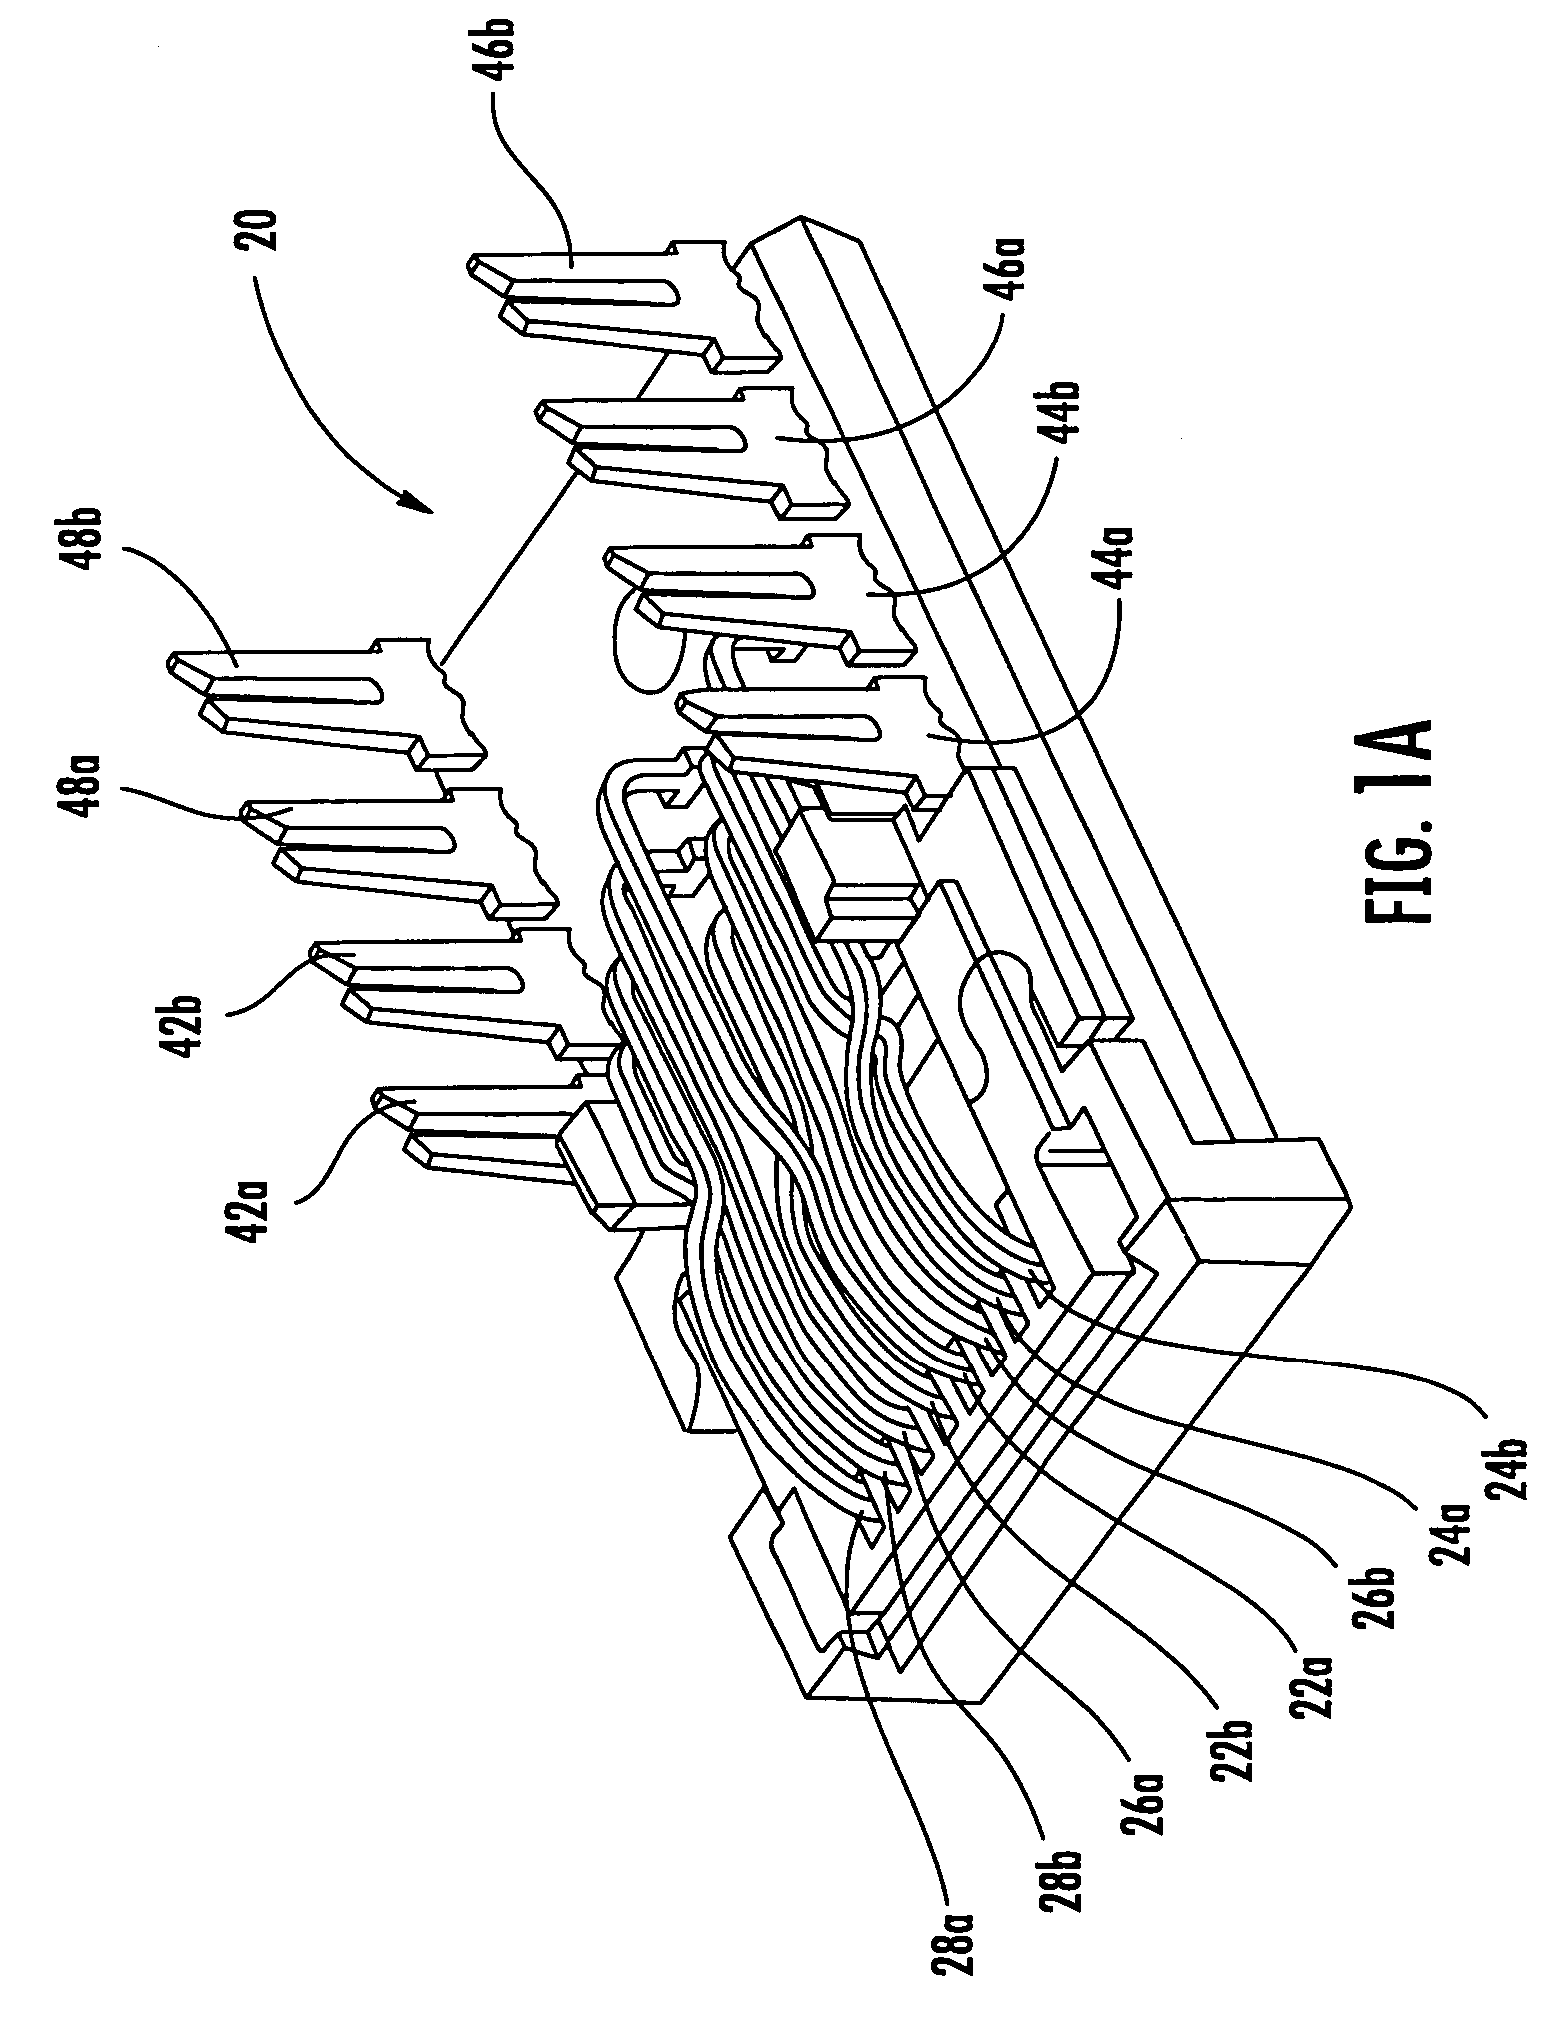 Communications jack with printed wiring board having paired coupling conductors